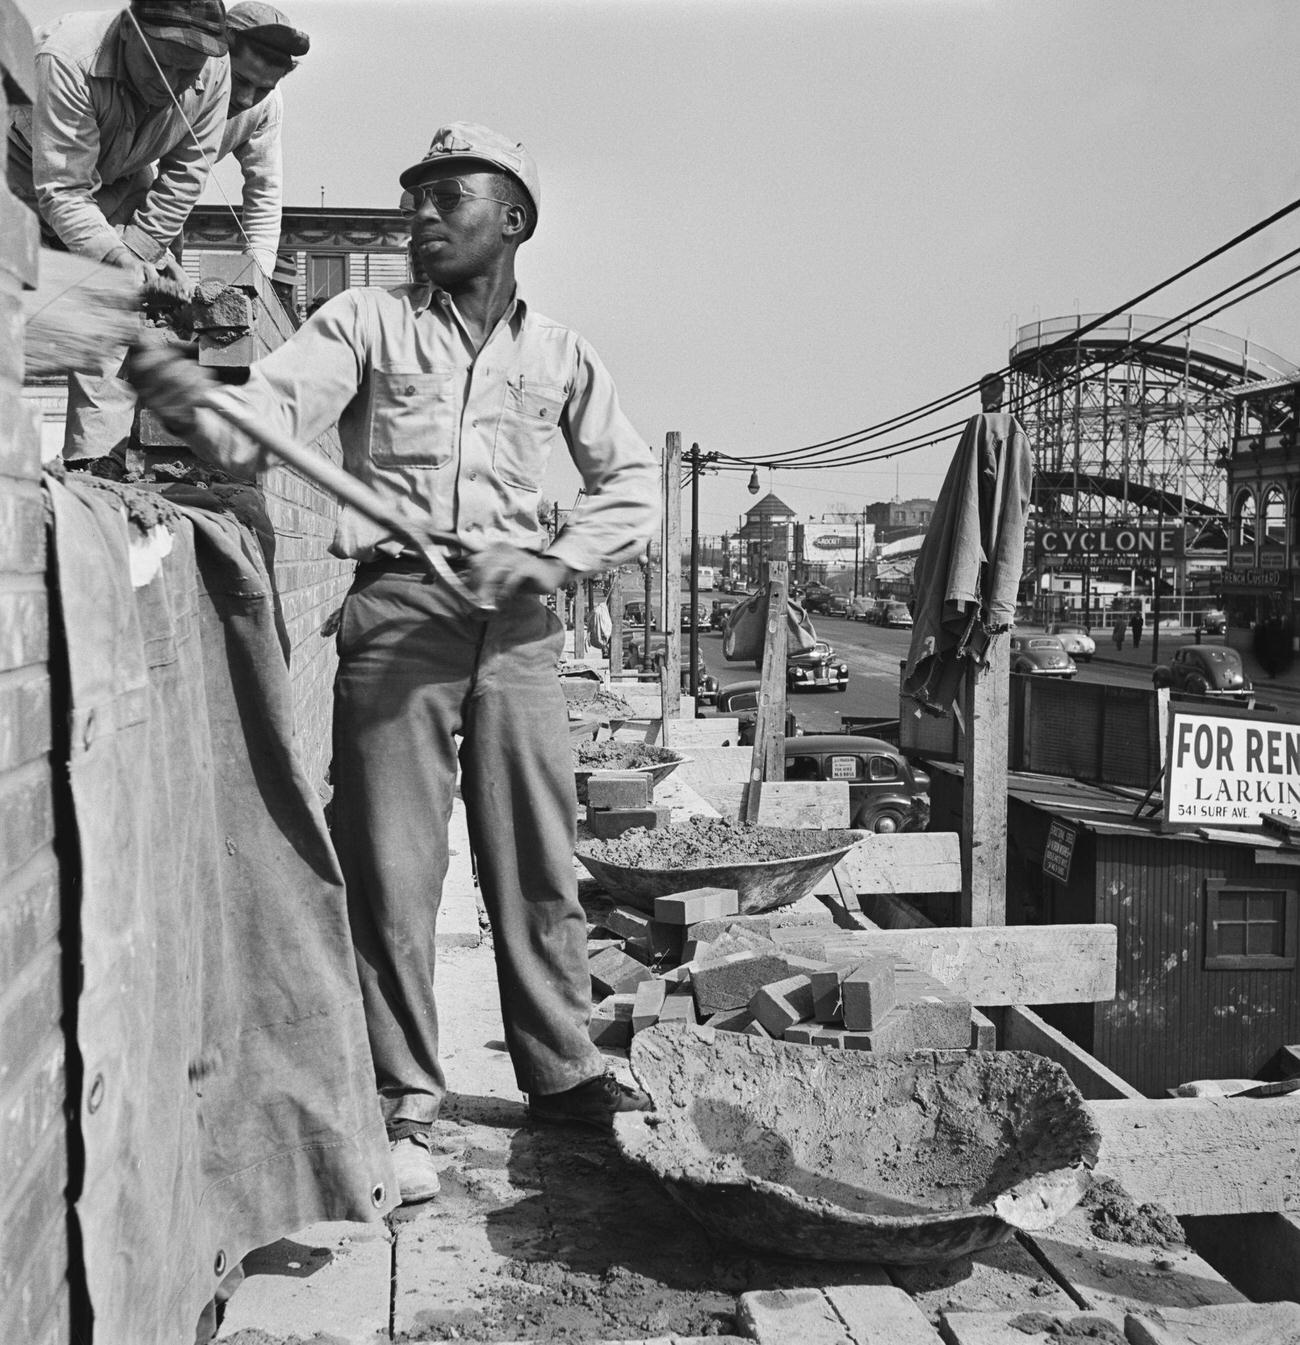 Bricklayer Shoveling Mortar With Cyclone Roller Coaster In Background At Coney Island, 1950